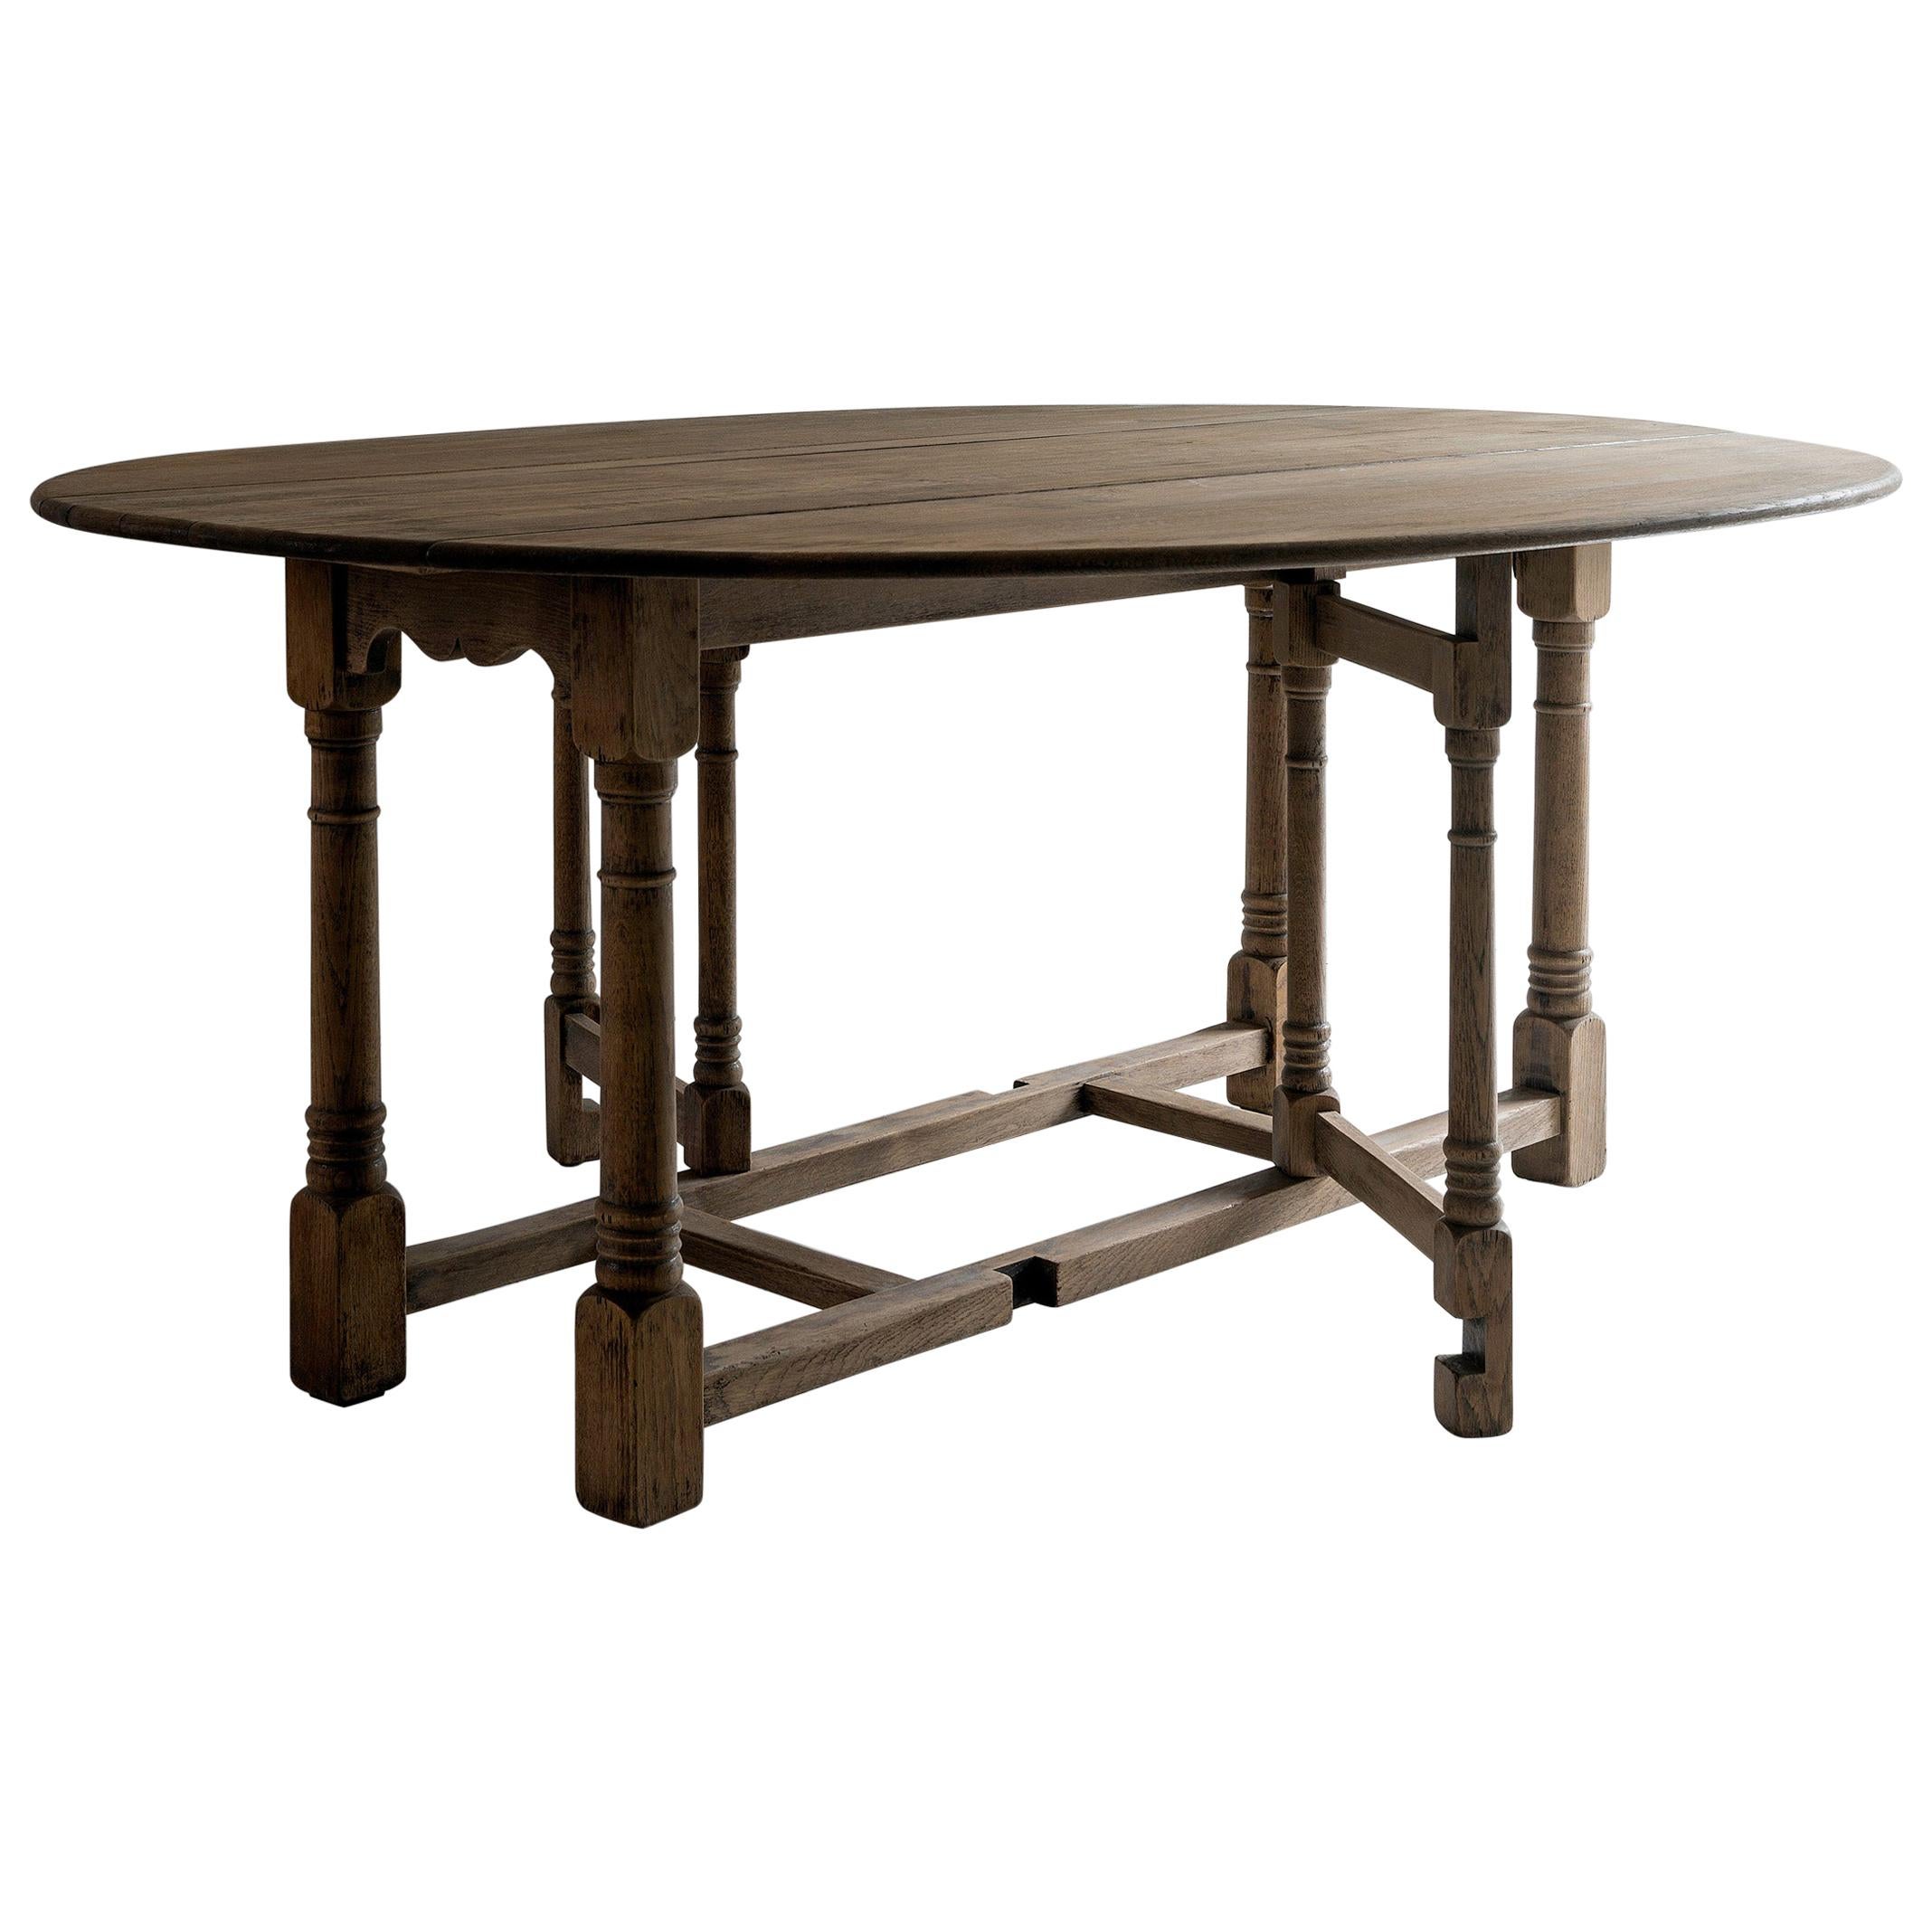 Large 19th Century Flemish Oval Drop-Leaf Dining Table of Great Proportions